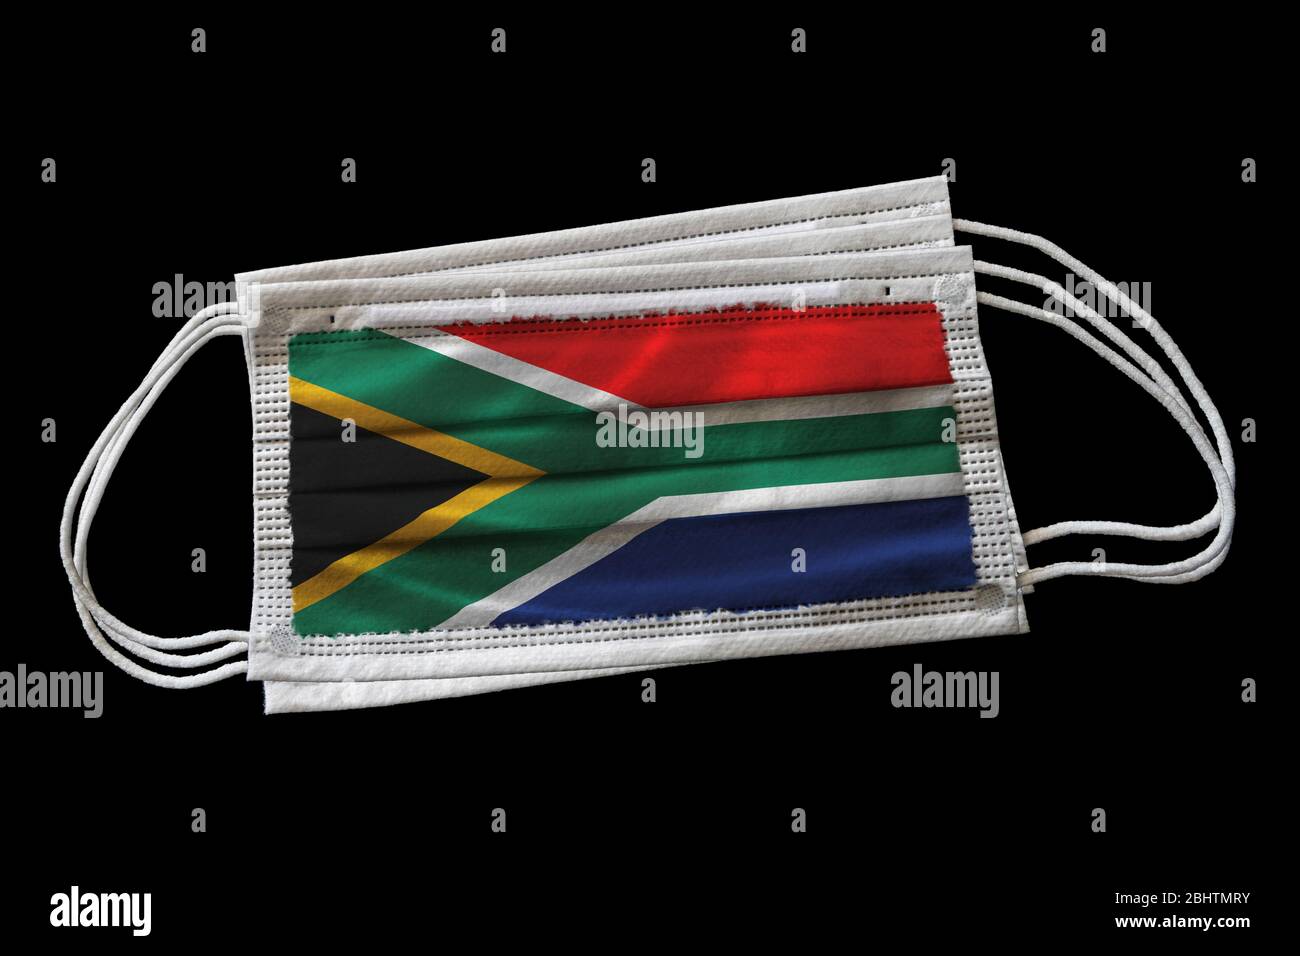 Surgical face masks with South Africa flag printed. Isolated on black background. Concept of face mask usage in South African effort to combat Covid-1 Stock Photo